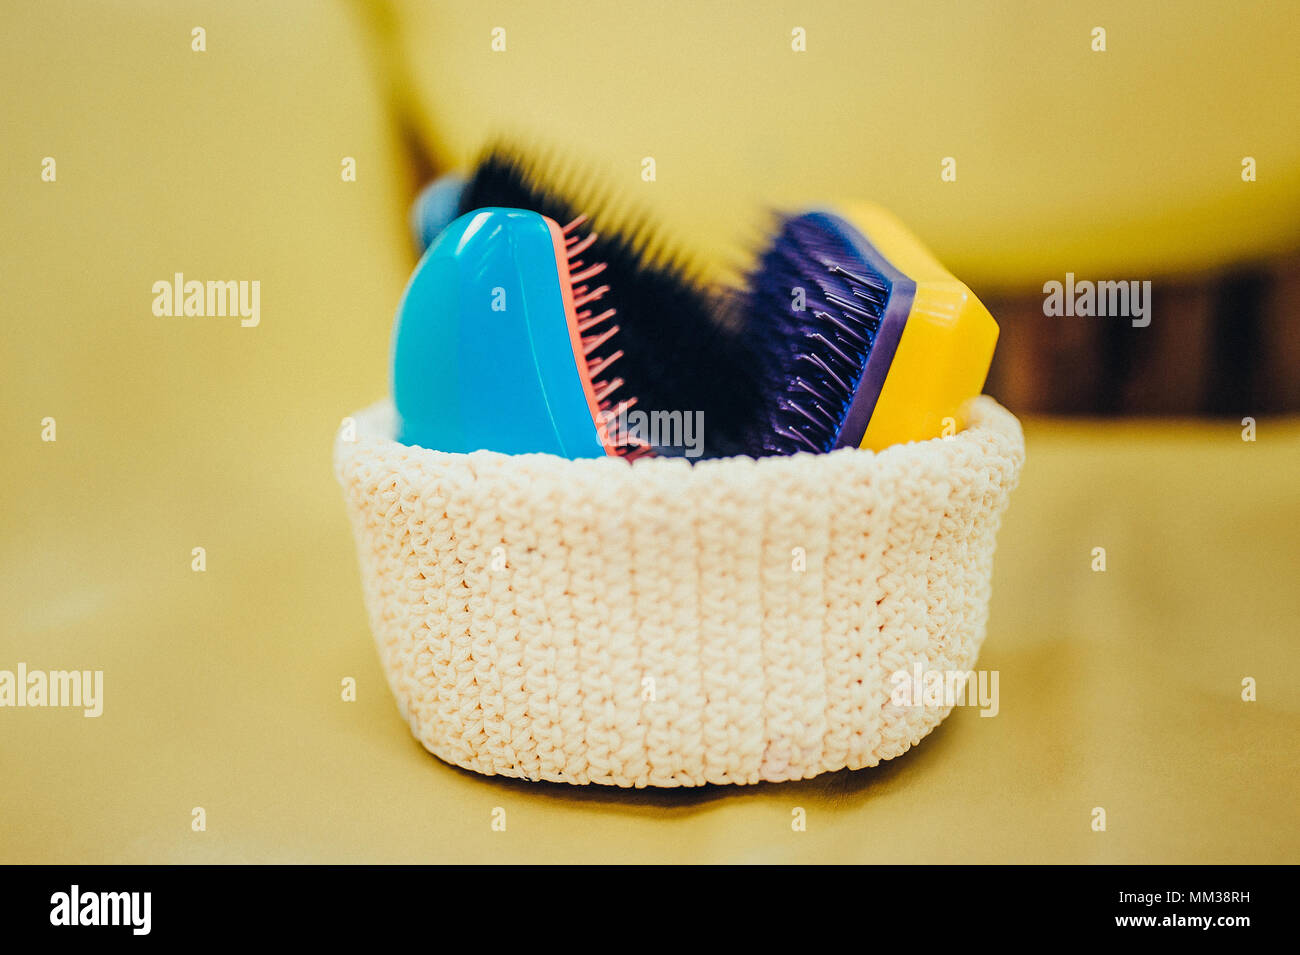 Basket with combs and round hair brushes. Toned image. Comb for combing raw hair in a basket in a hair salon. close up view Stock Photo